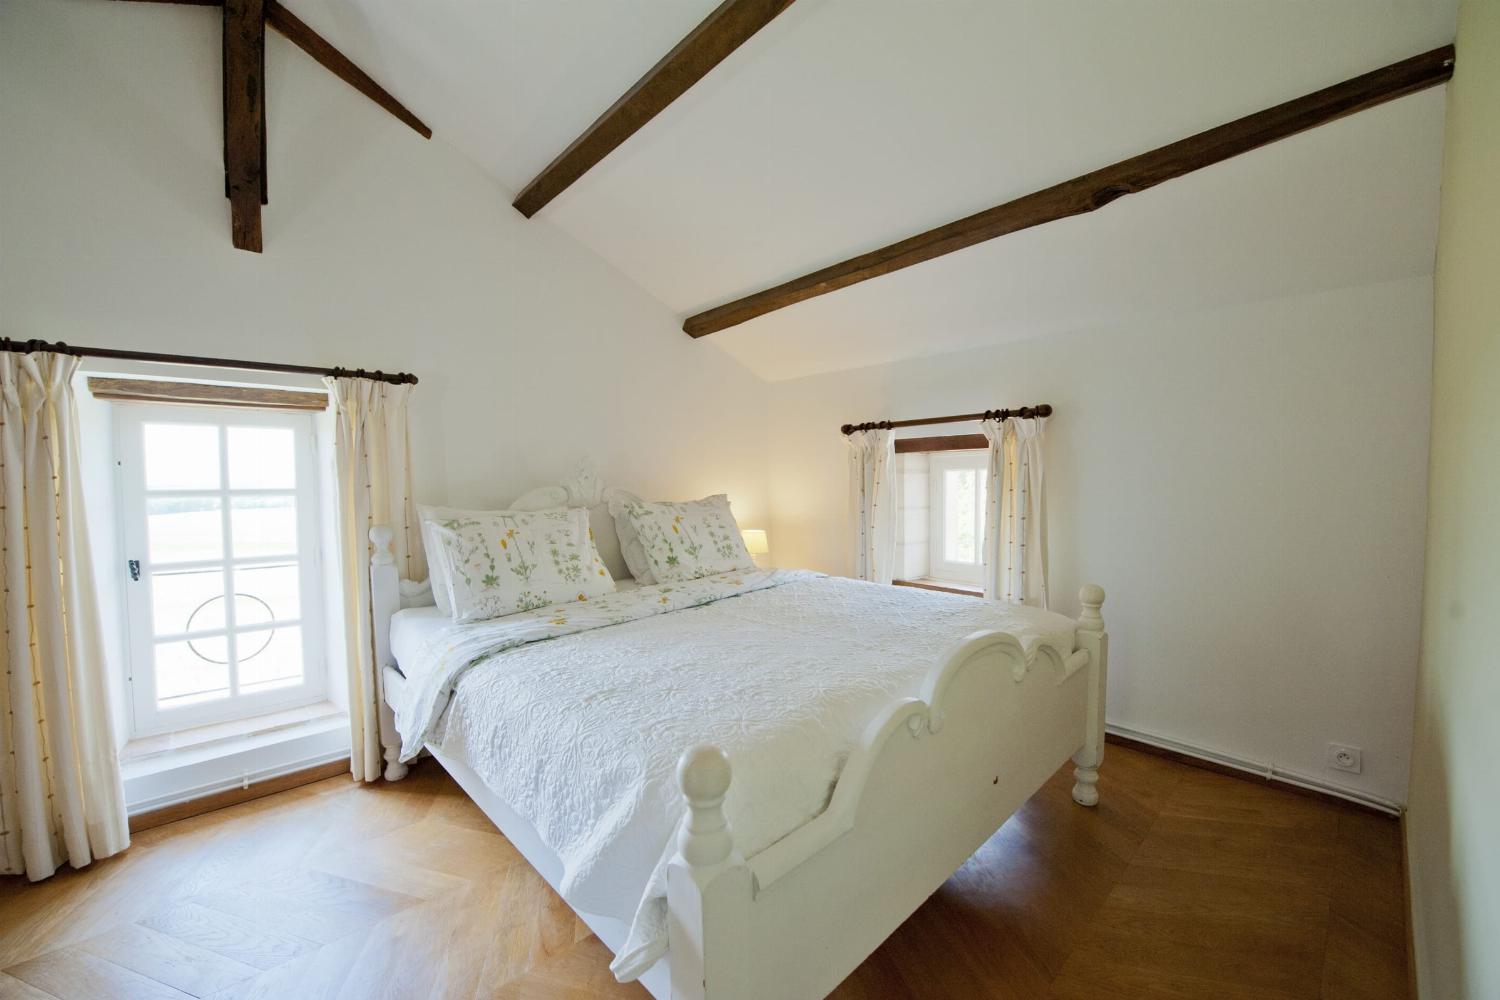 Bedroom | Rental accommodation in Nouvelle-Aquitaine